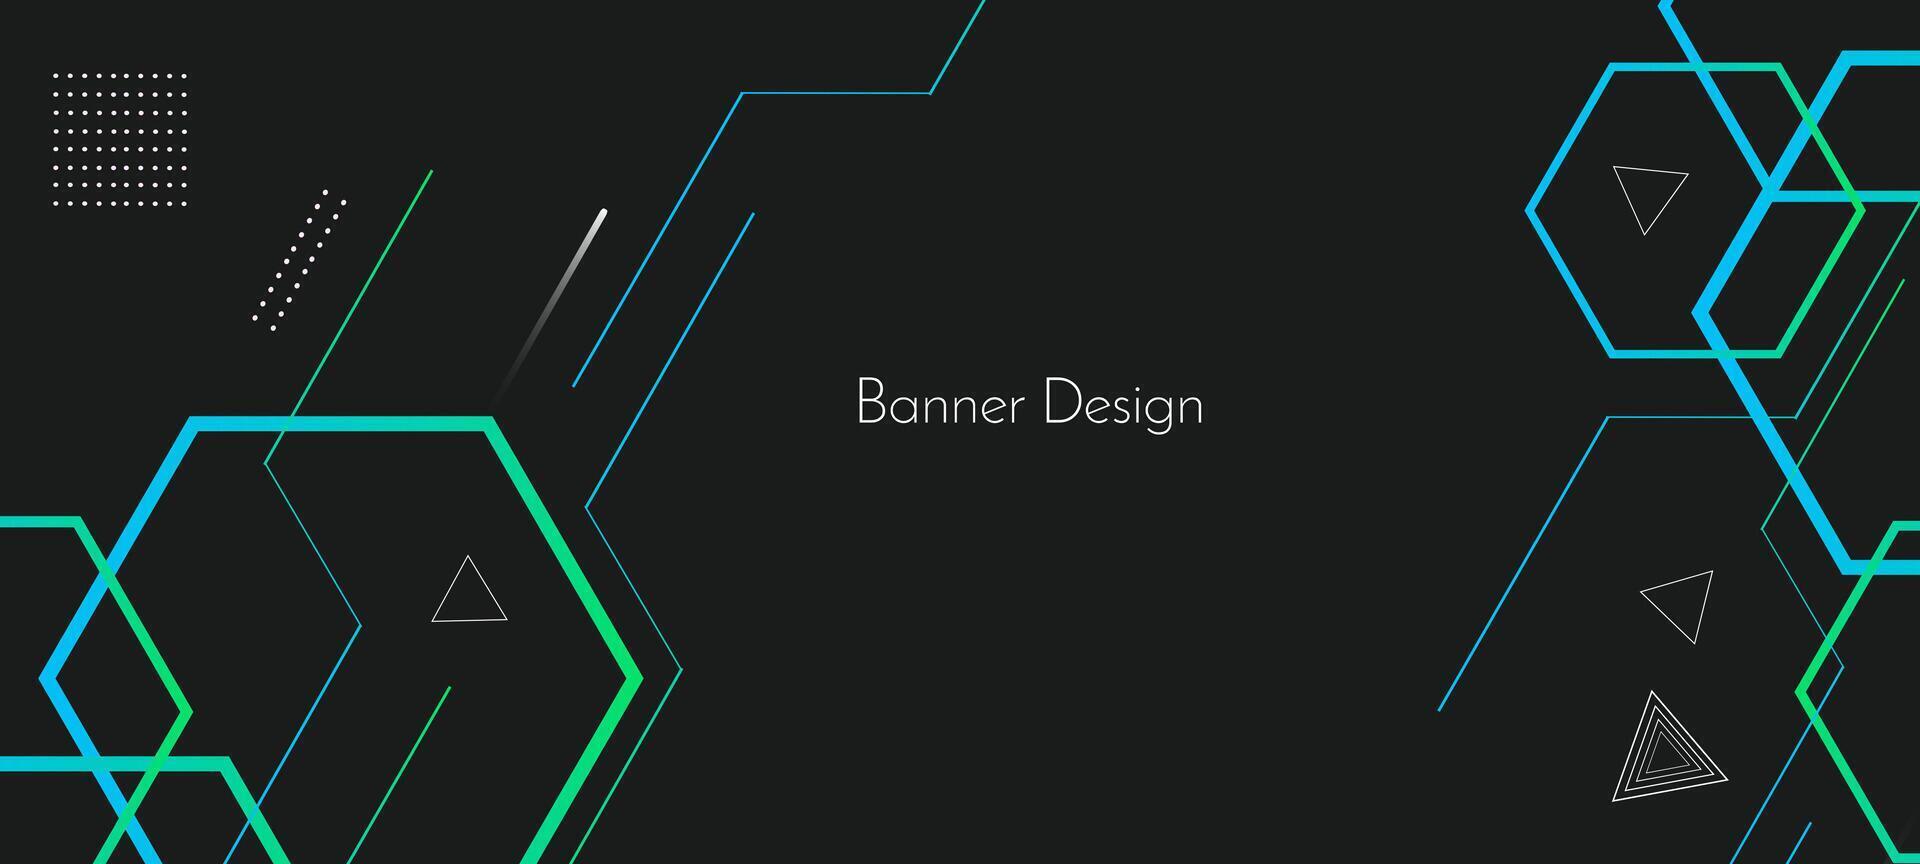 Abstract geometric color flowing lines decorative hexagonal design banner background vector